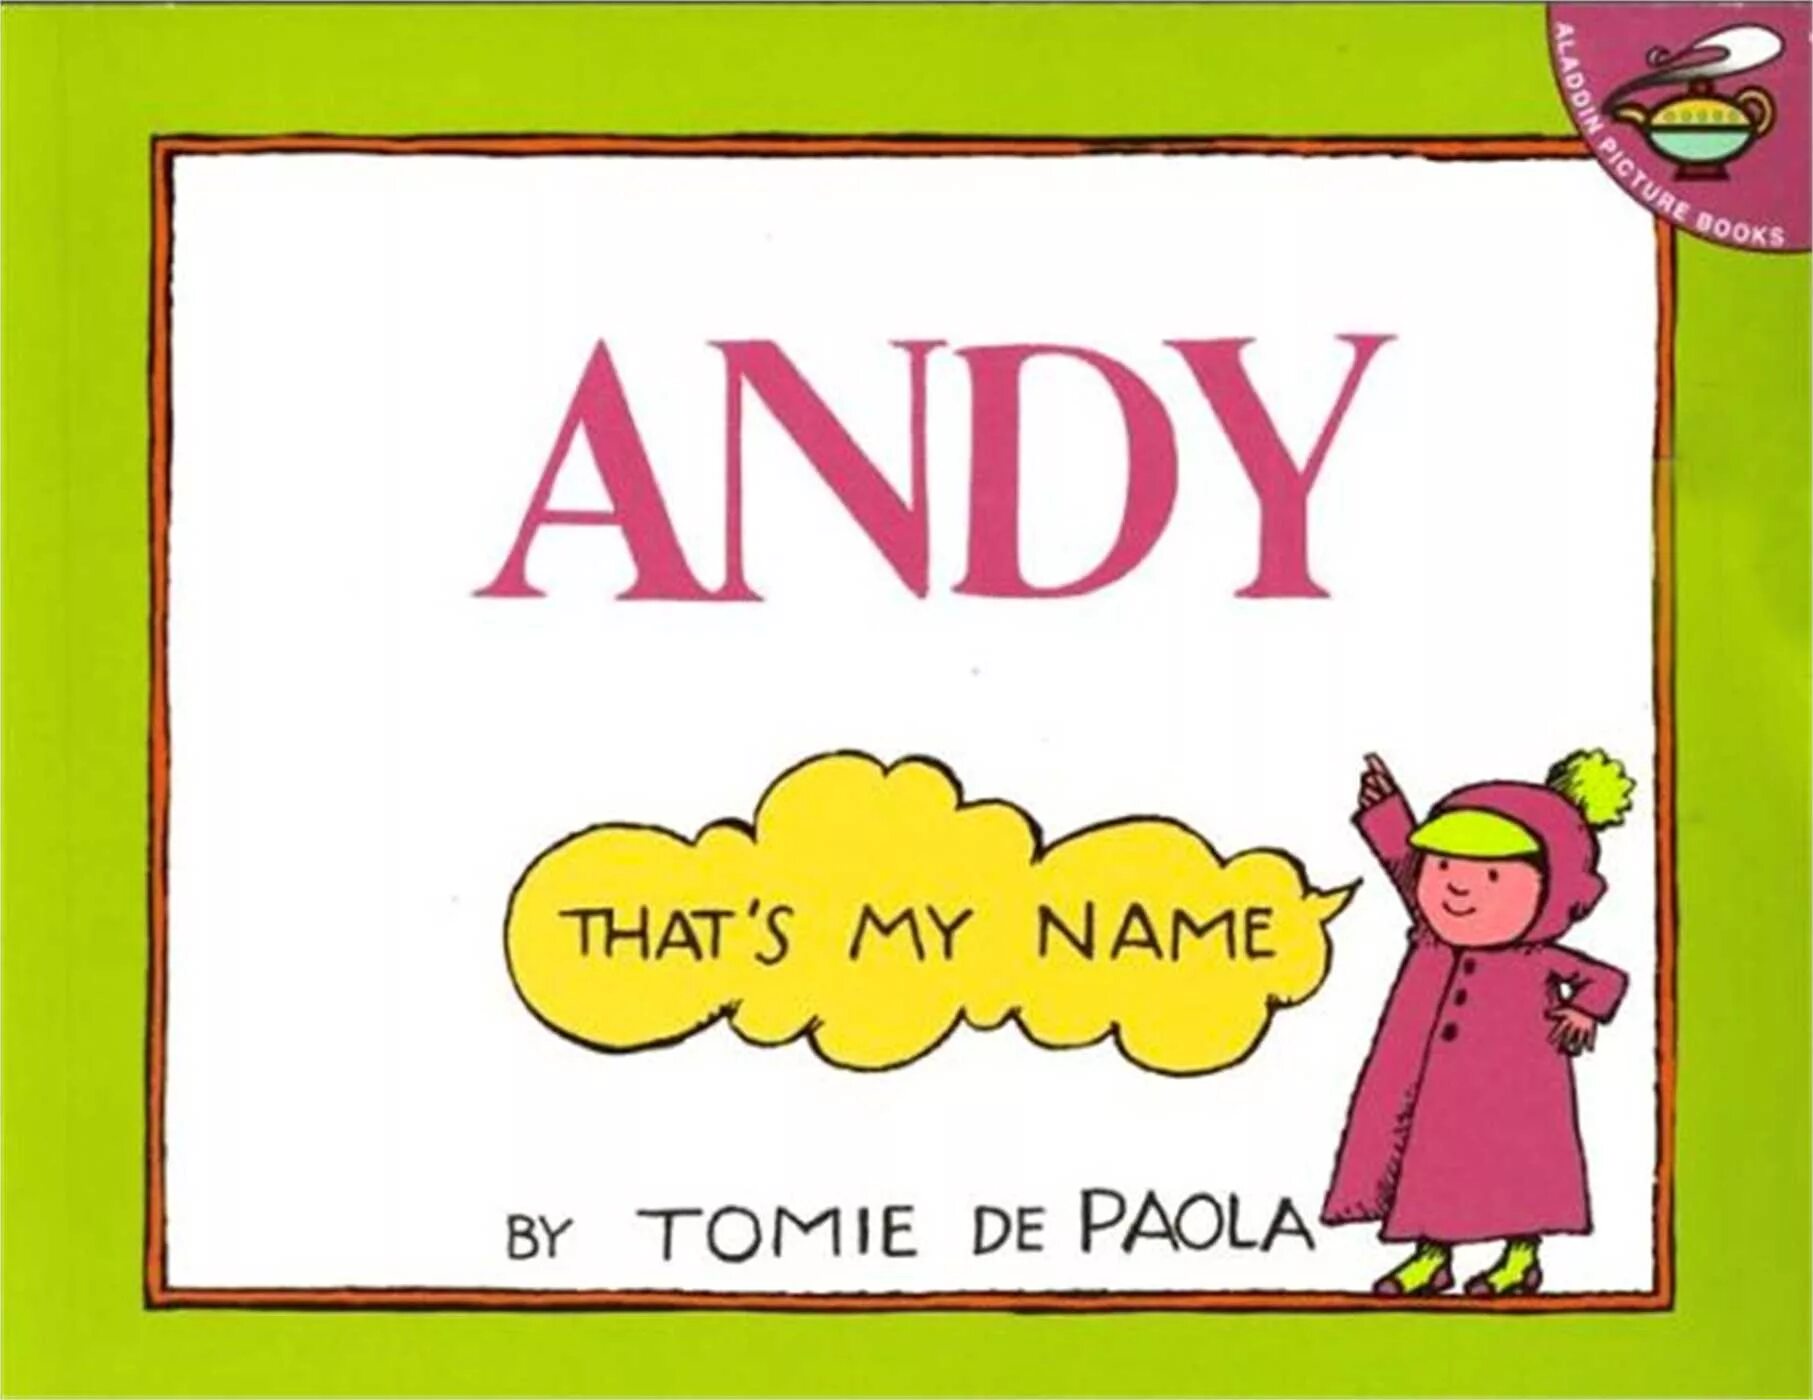 That s my man. That's my name. Thats my name. My name is Andrew. My name is Paola.